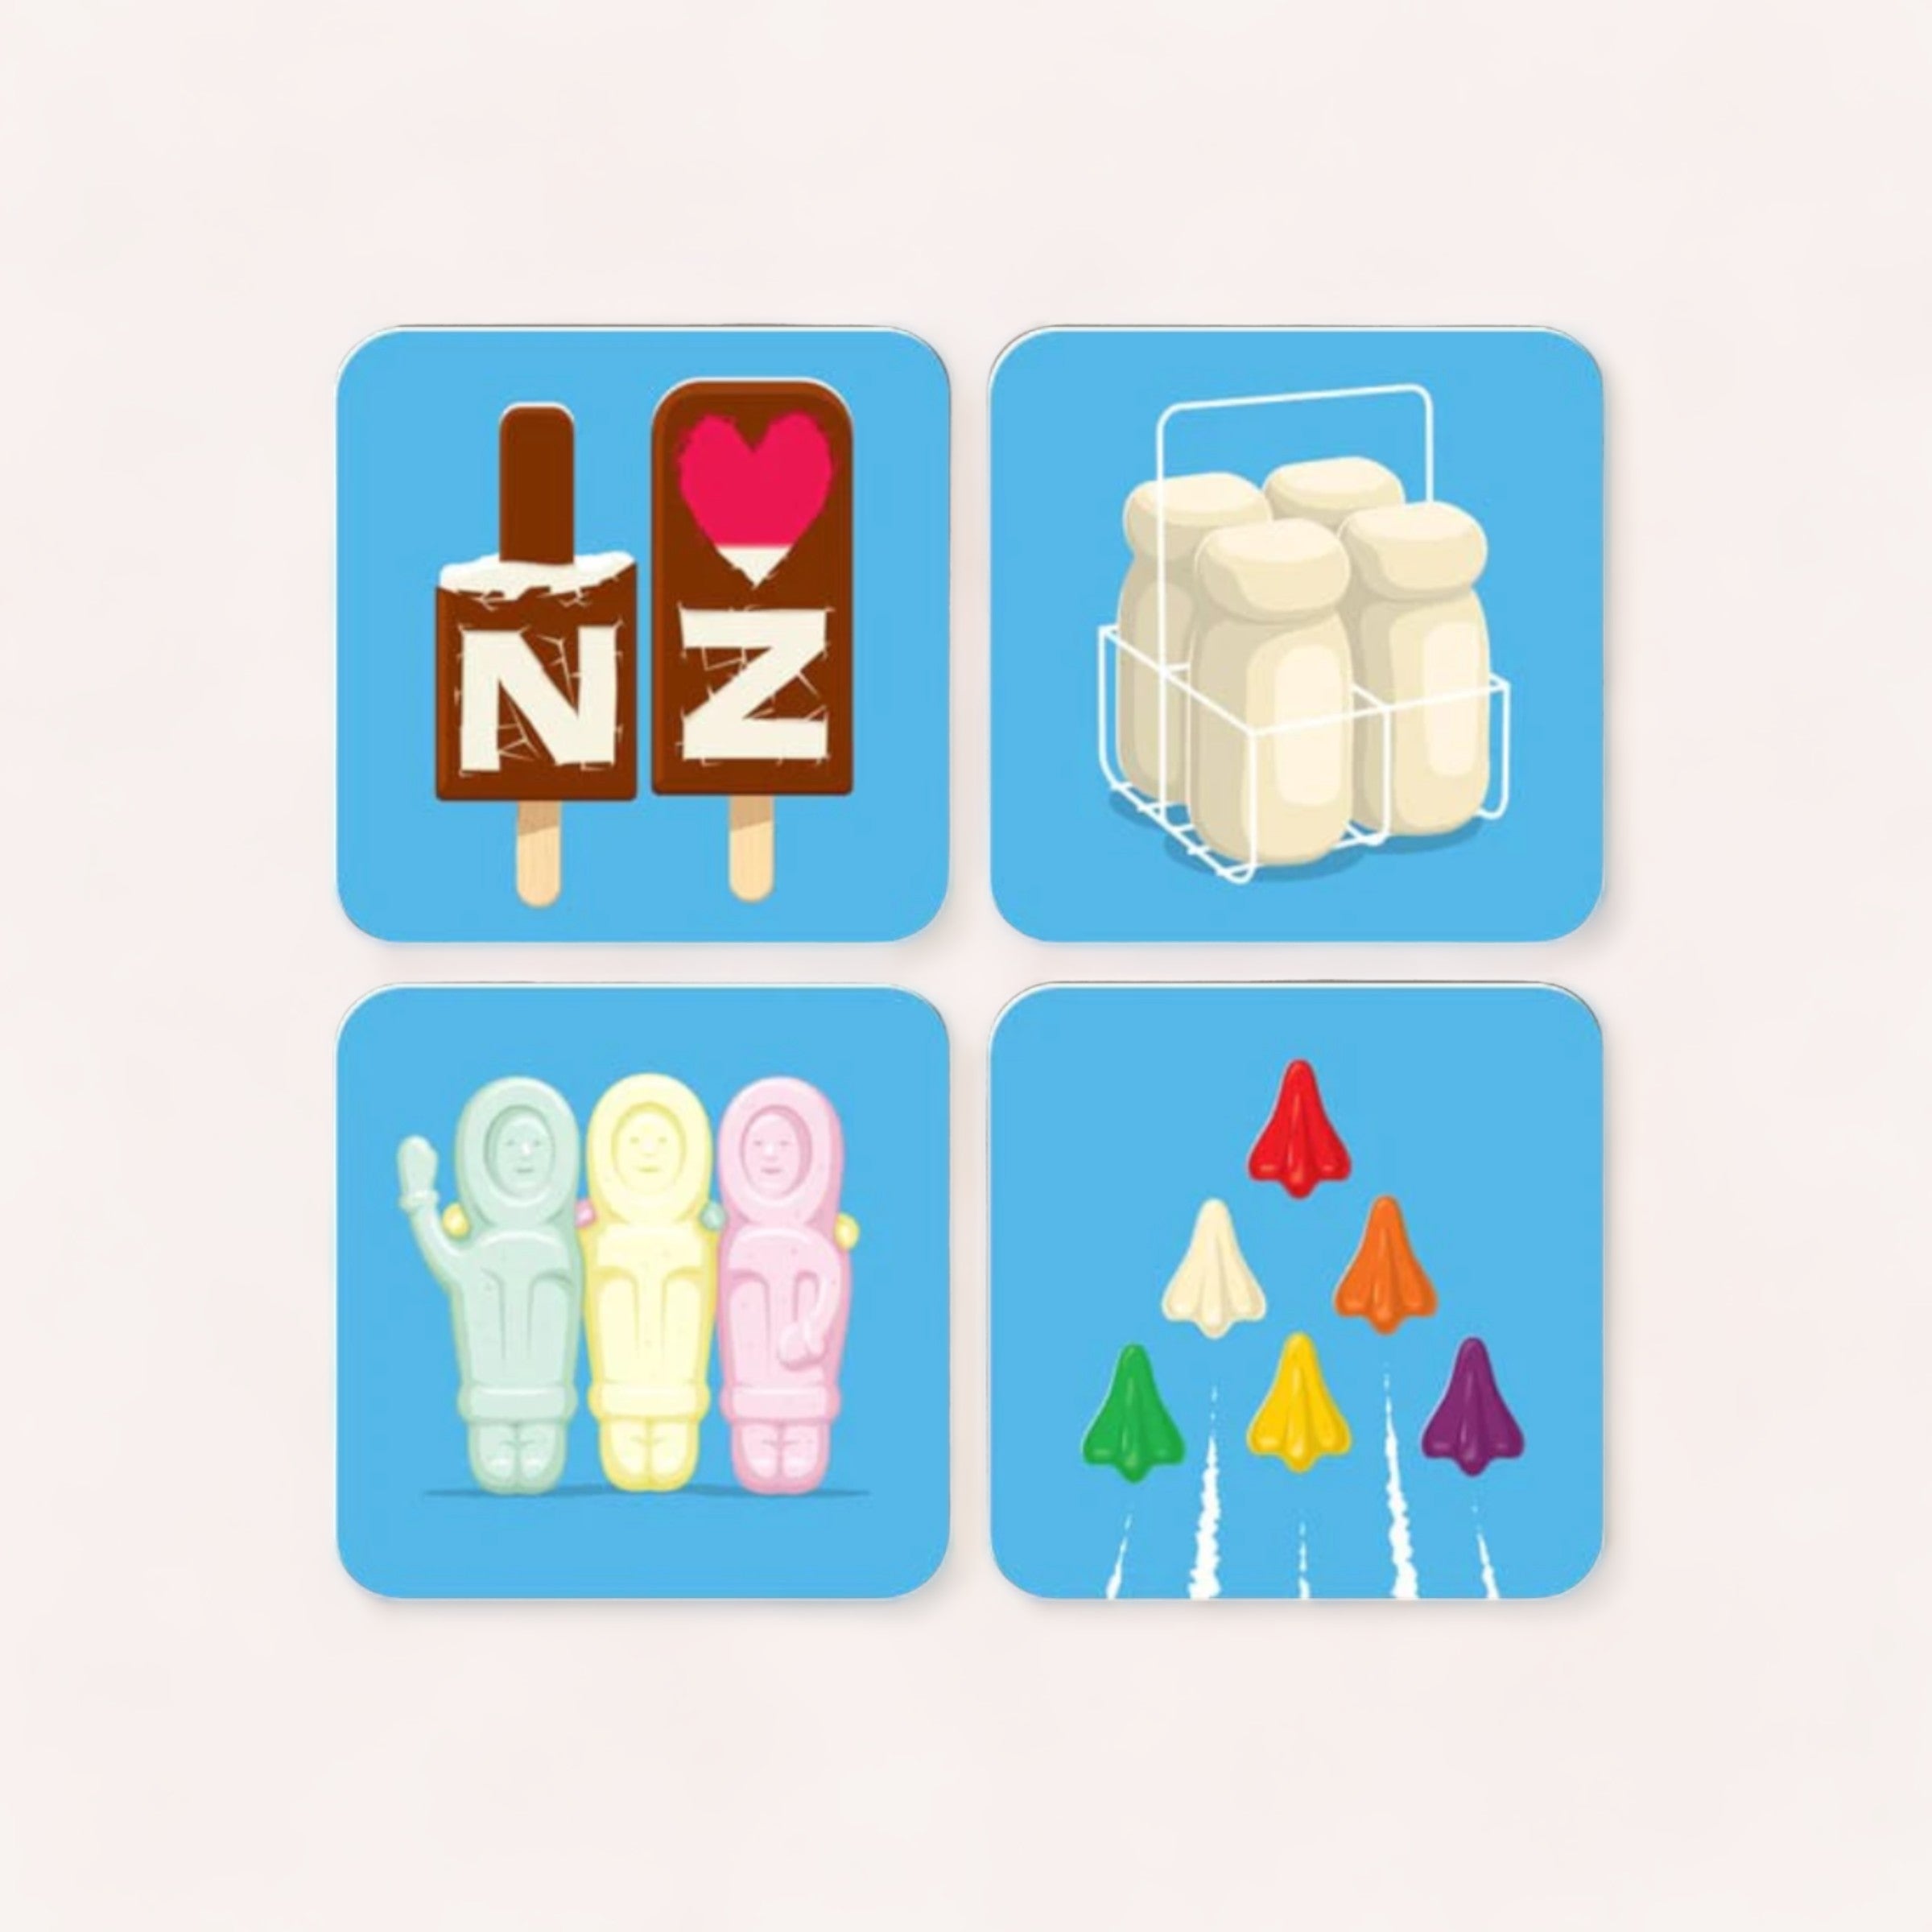 Four Sweet As Coaster Sets by Glenn Jones inspired, colorful icons representing different ice cream treats or popsicles, with each icon having a unique style and flavor.